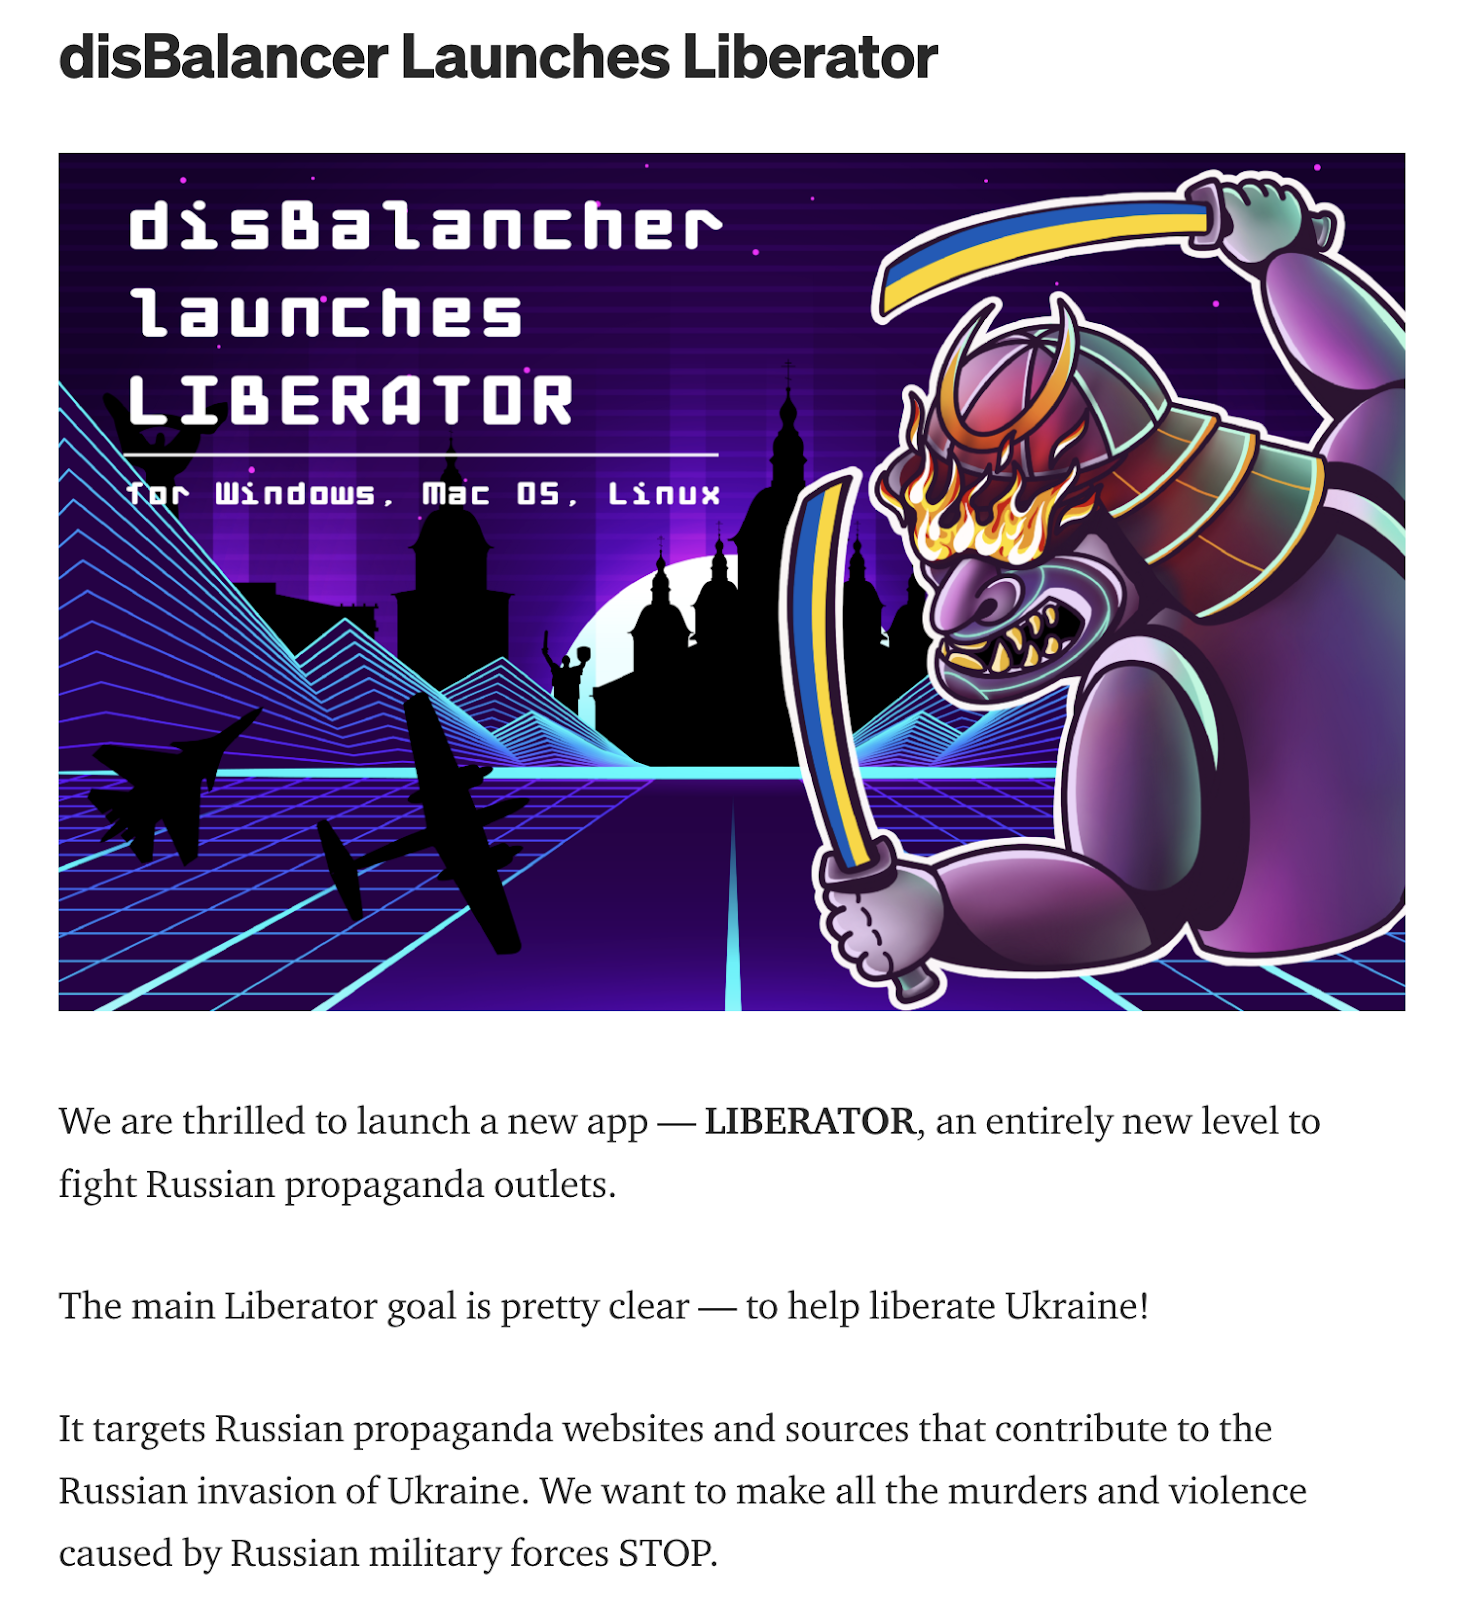 The Liberator on its actual website